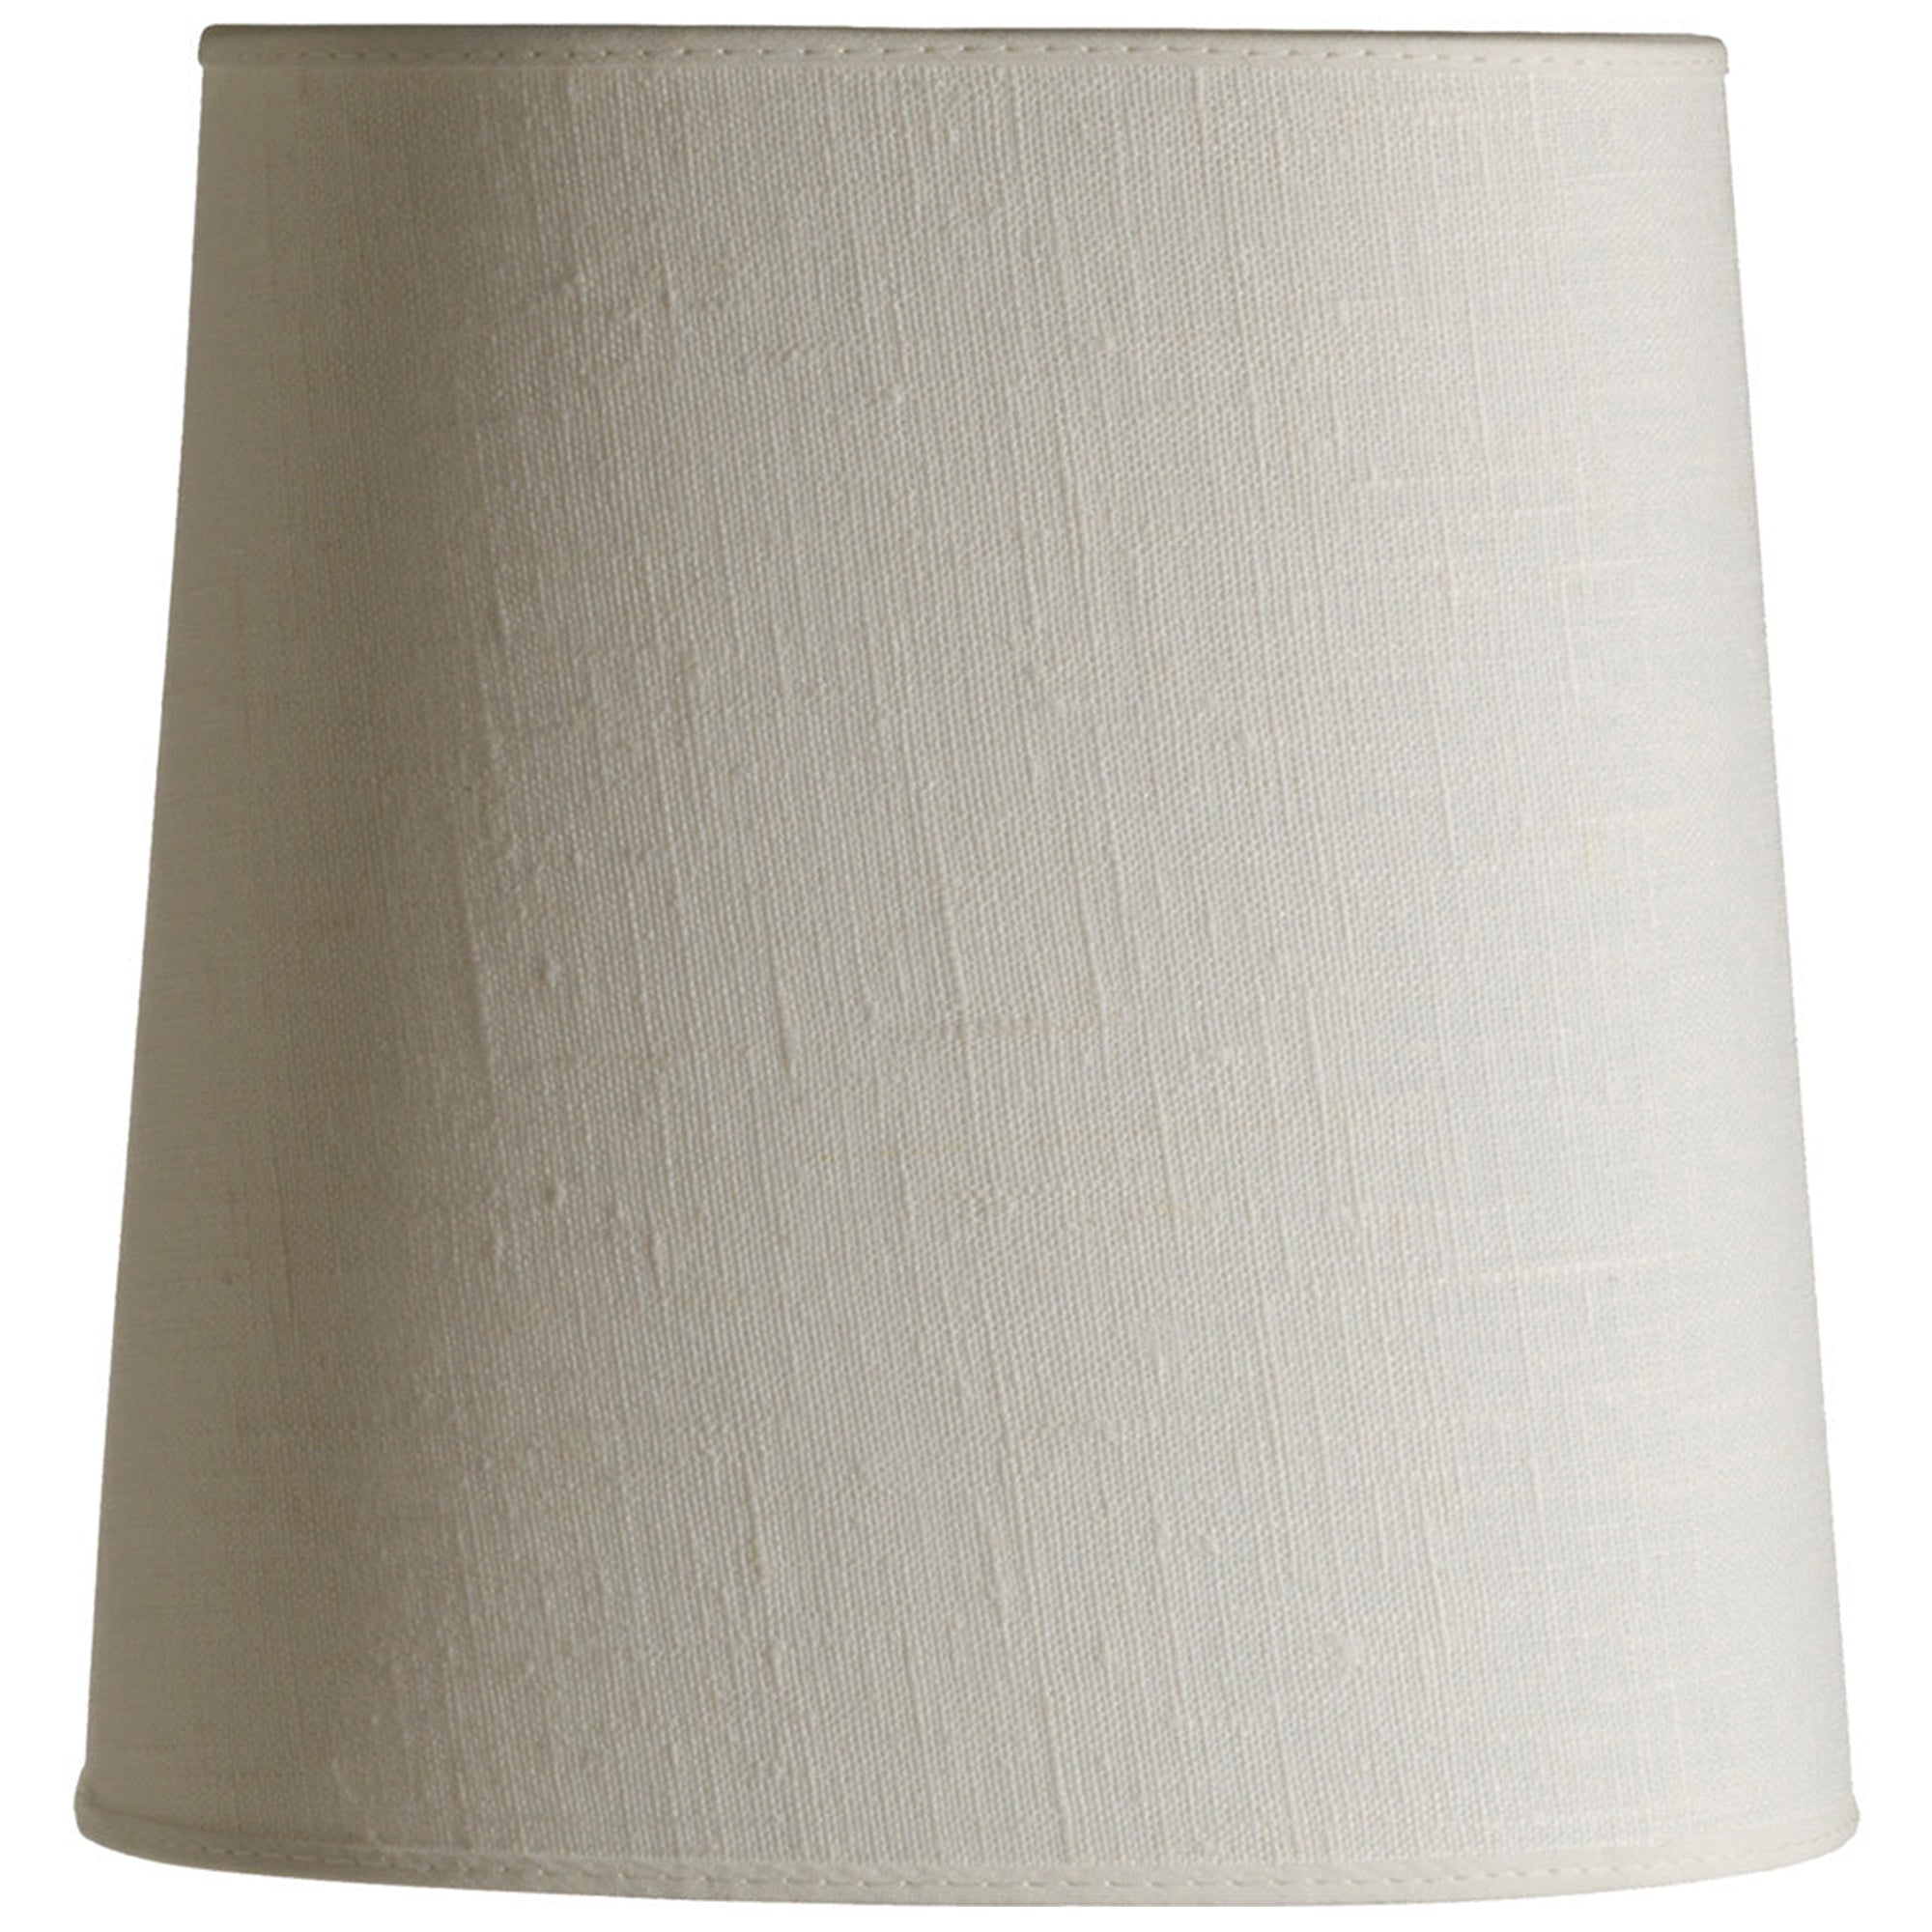 Large White Oval Lampshade